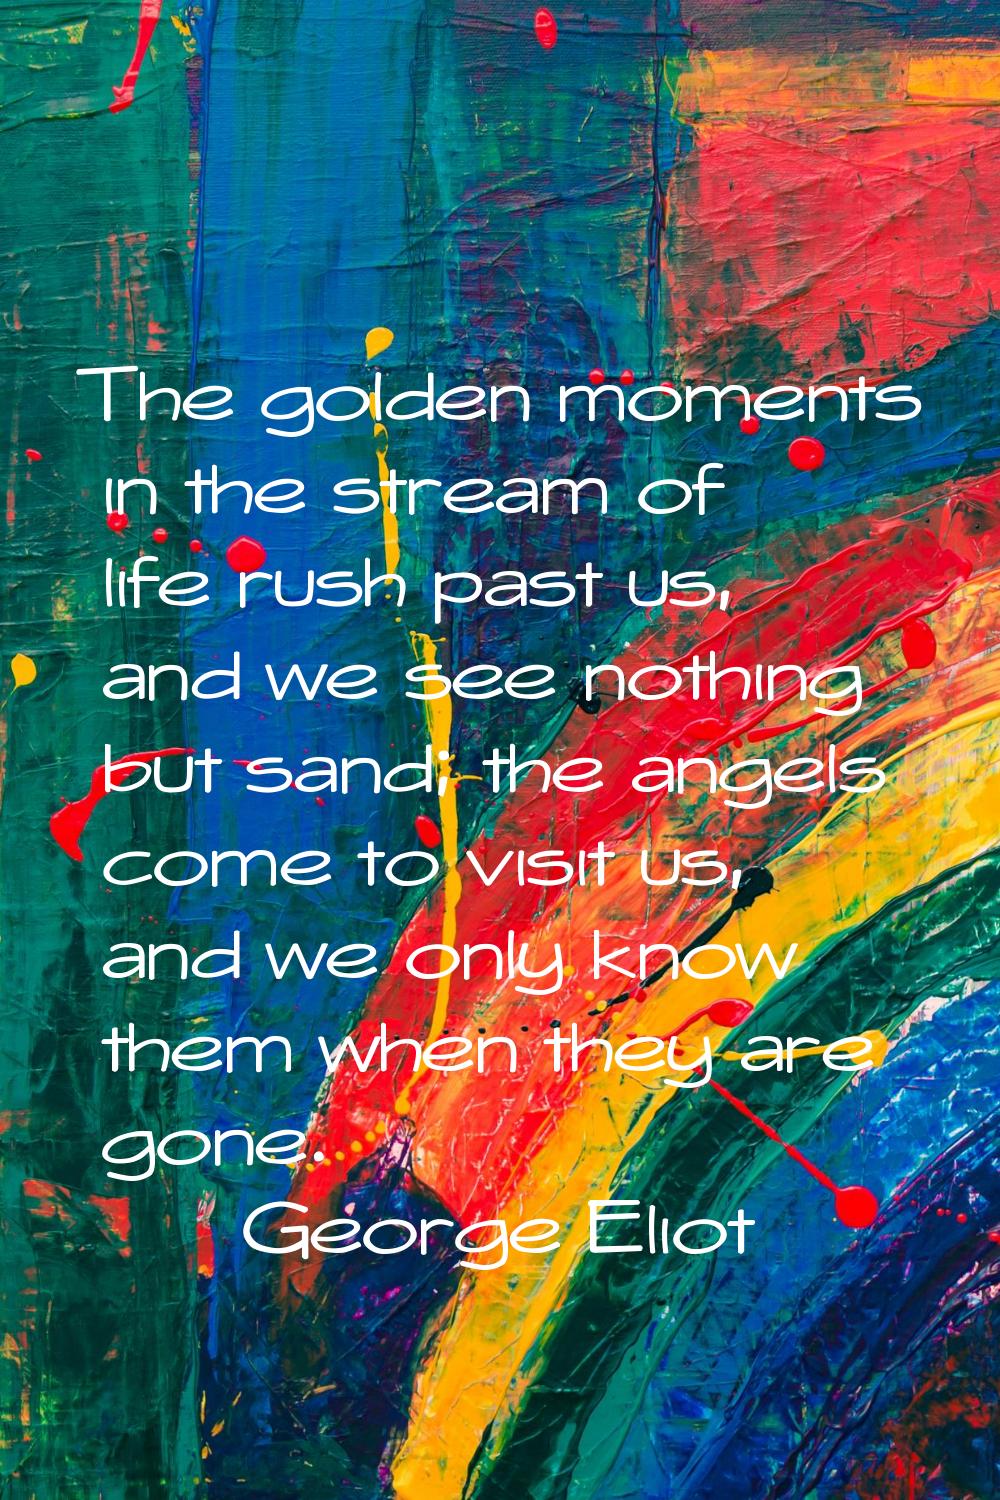 The golden moments in the stream of life rush past us, and we see nothing but sand; the angels come